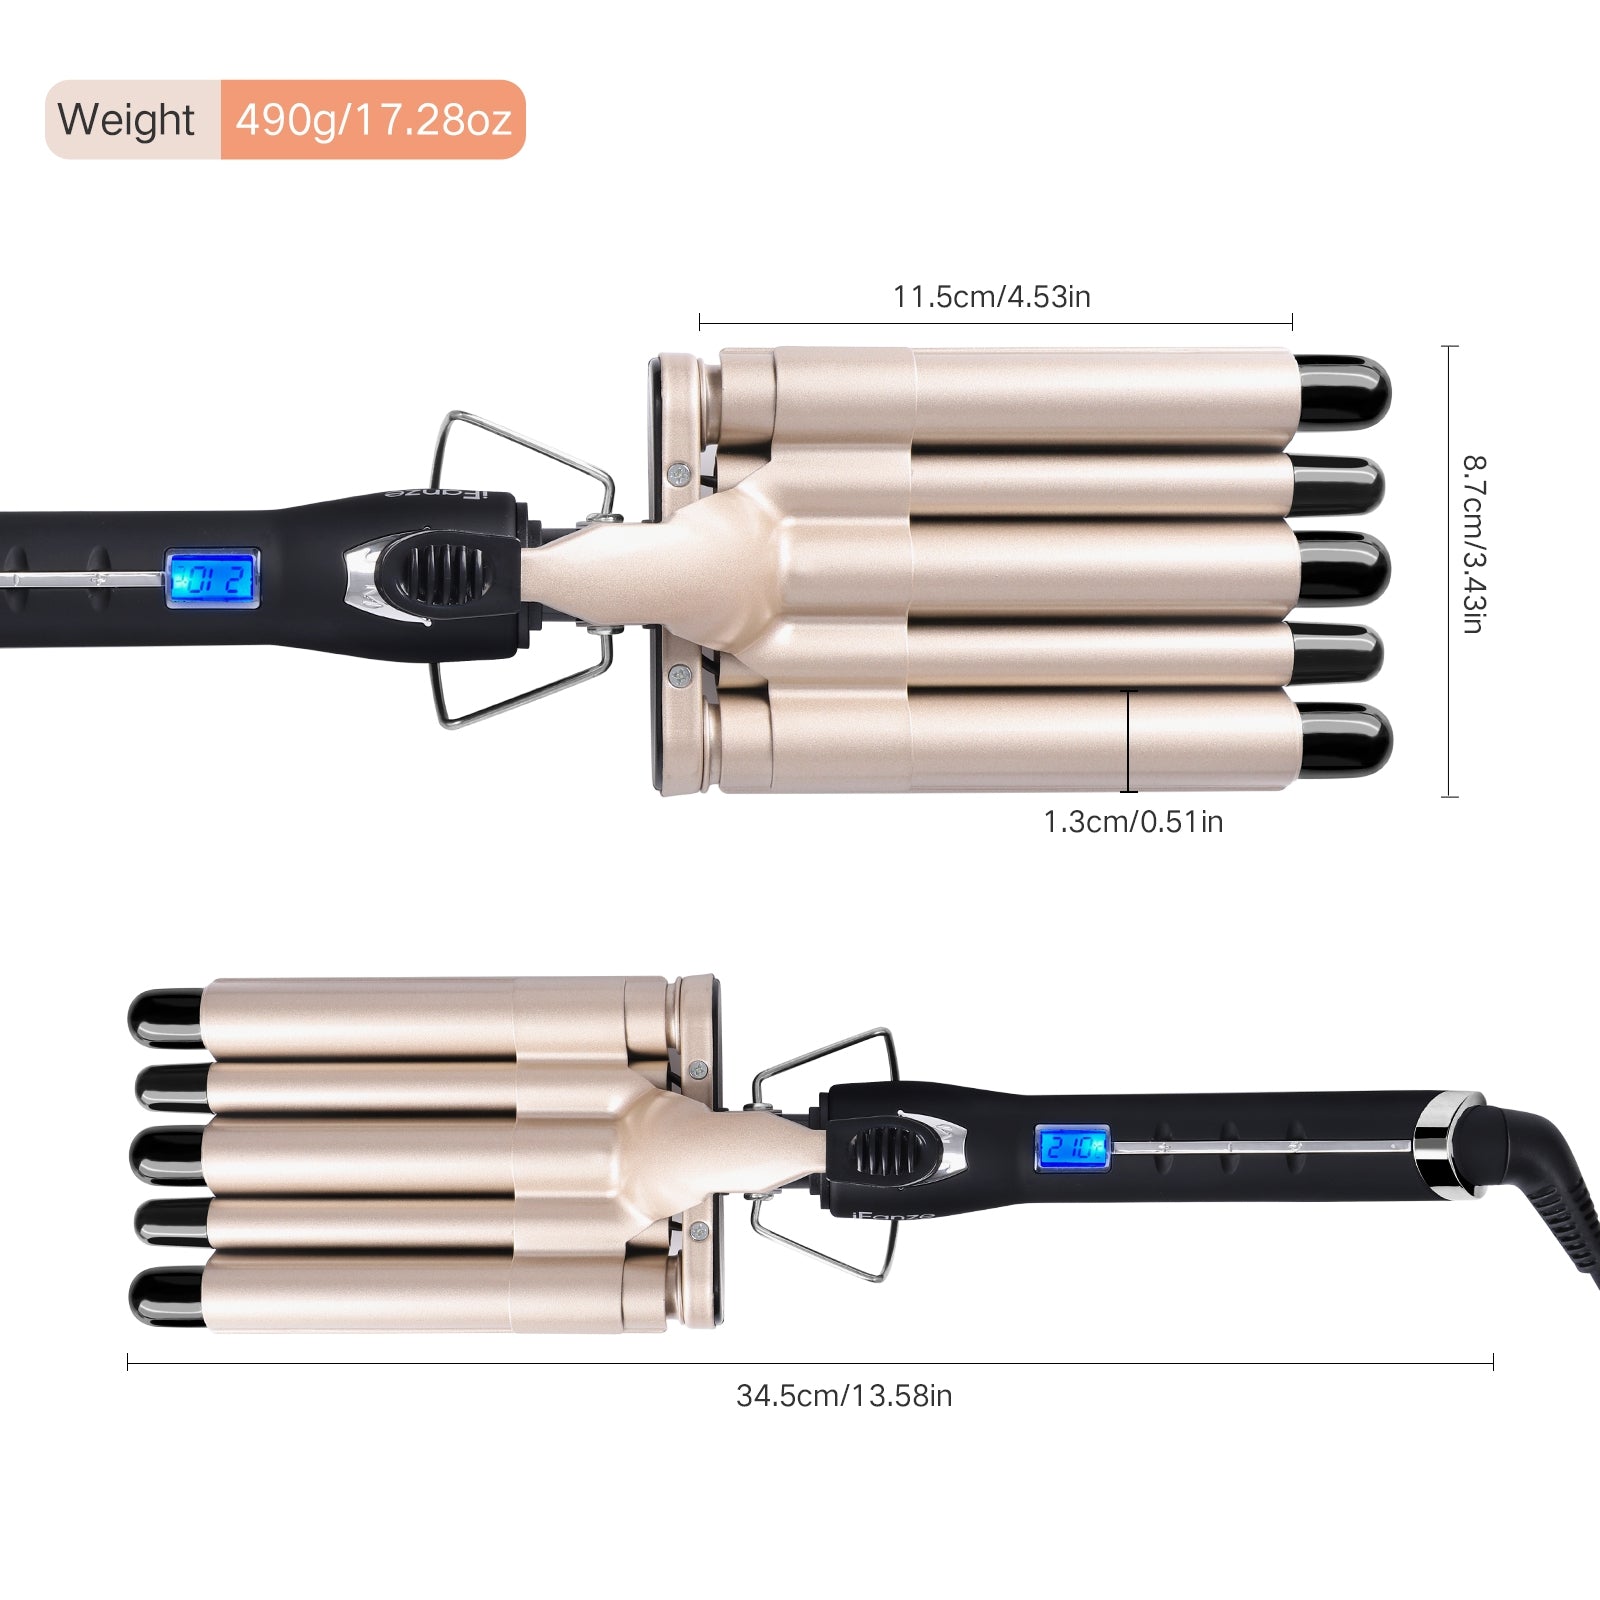 iFanze 3 Barrel Curling Iron Wand, 1" Tourmaline Ceramic Multi Functional 3 Barrel Waver Crimper Hair Iron with LCD Temperature Display, Travel Size, Beige